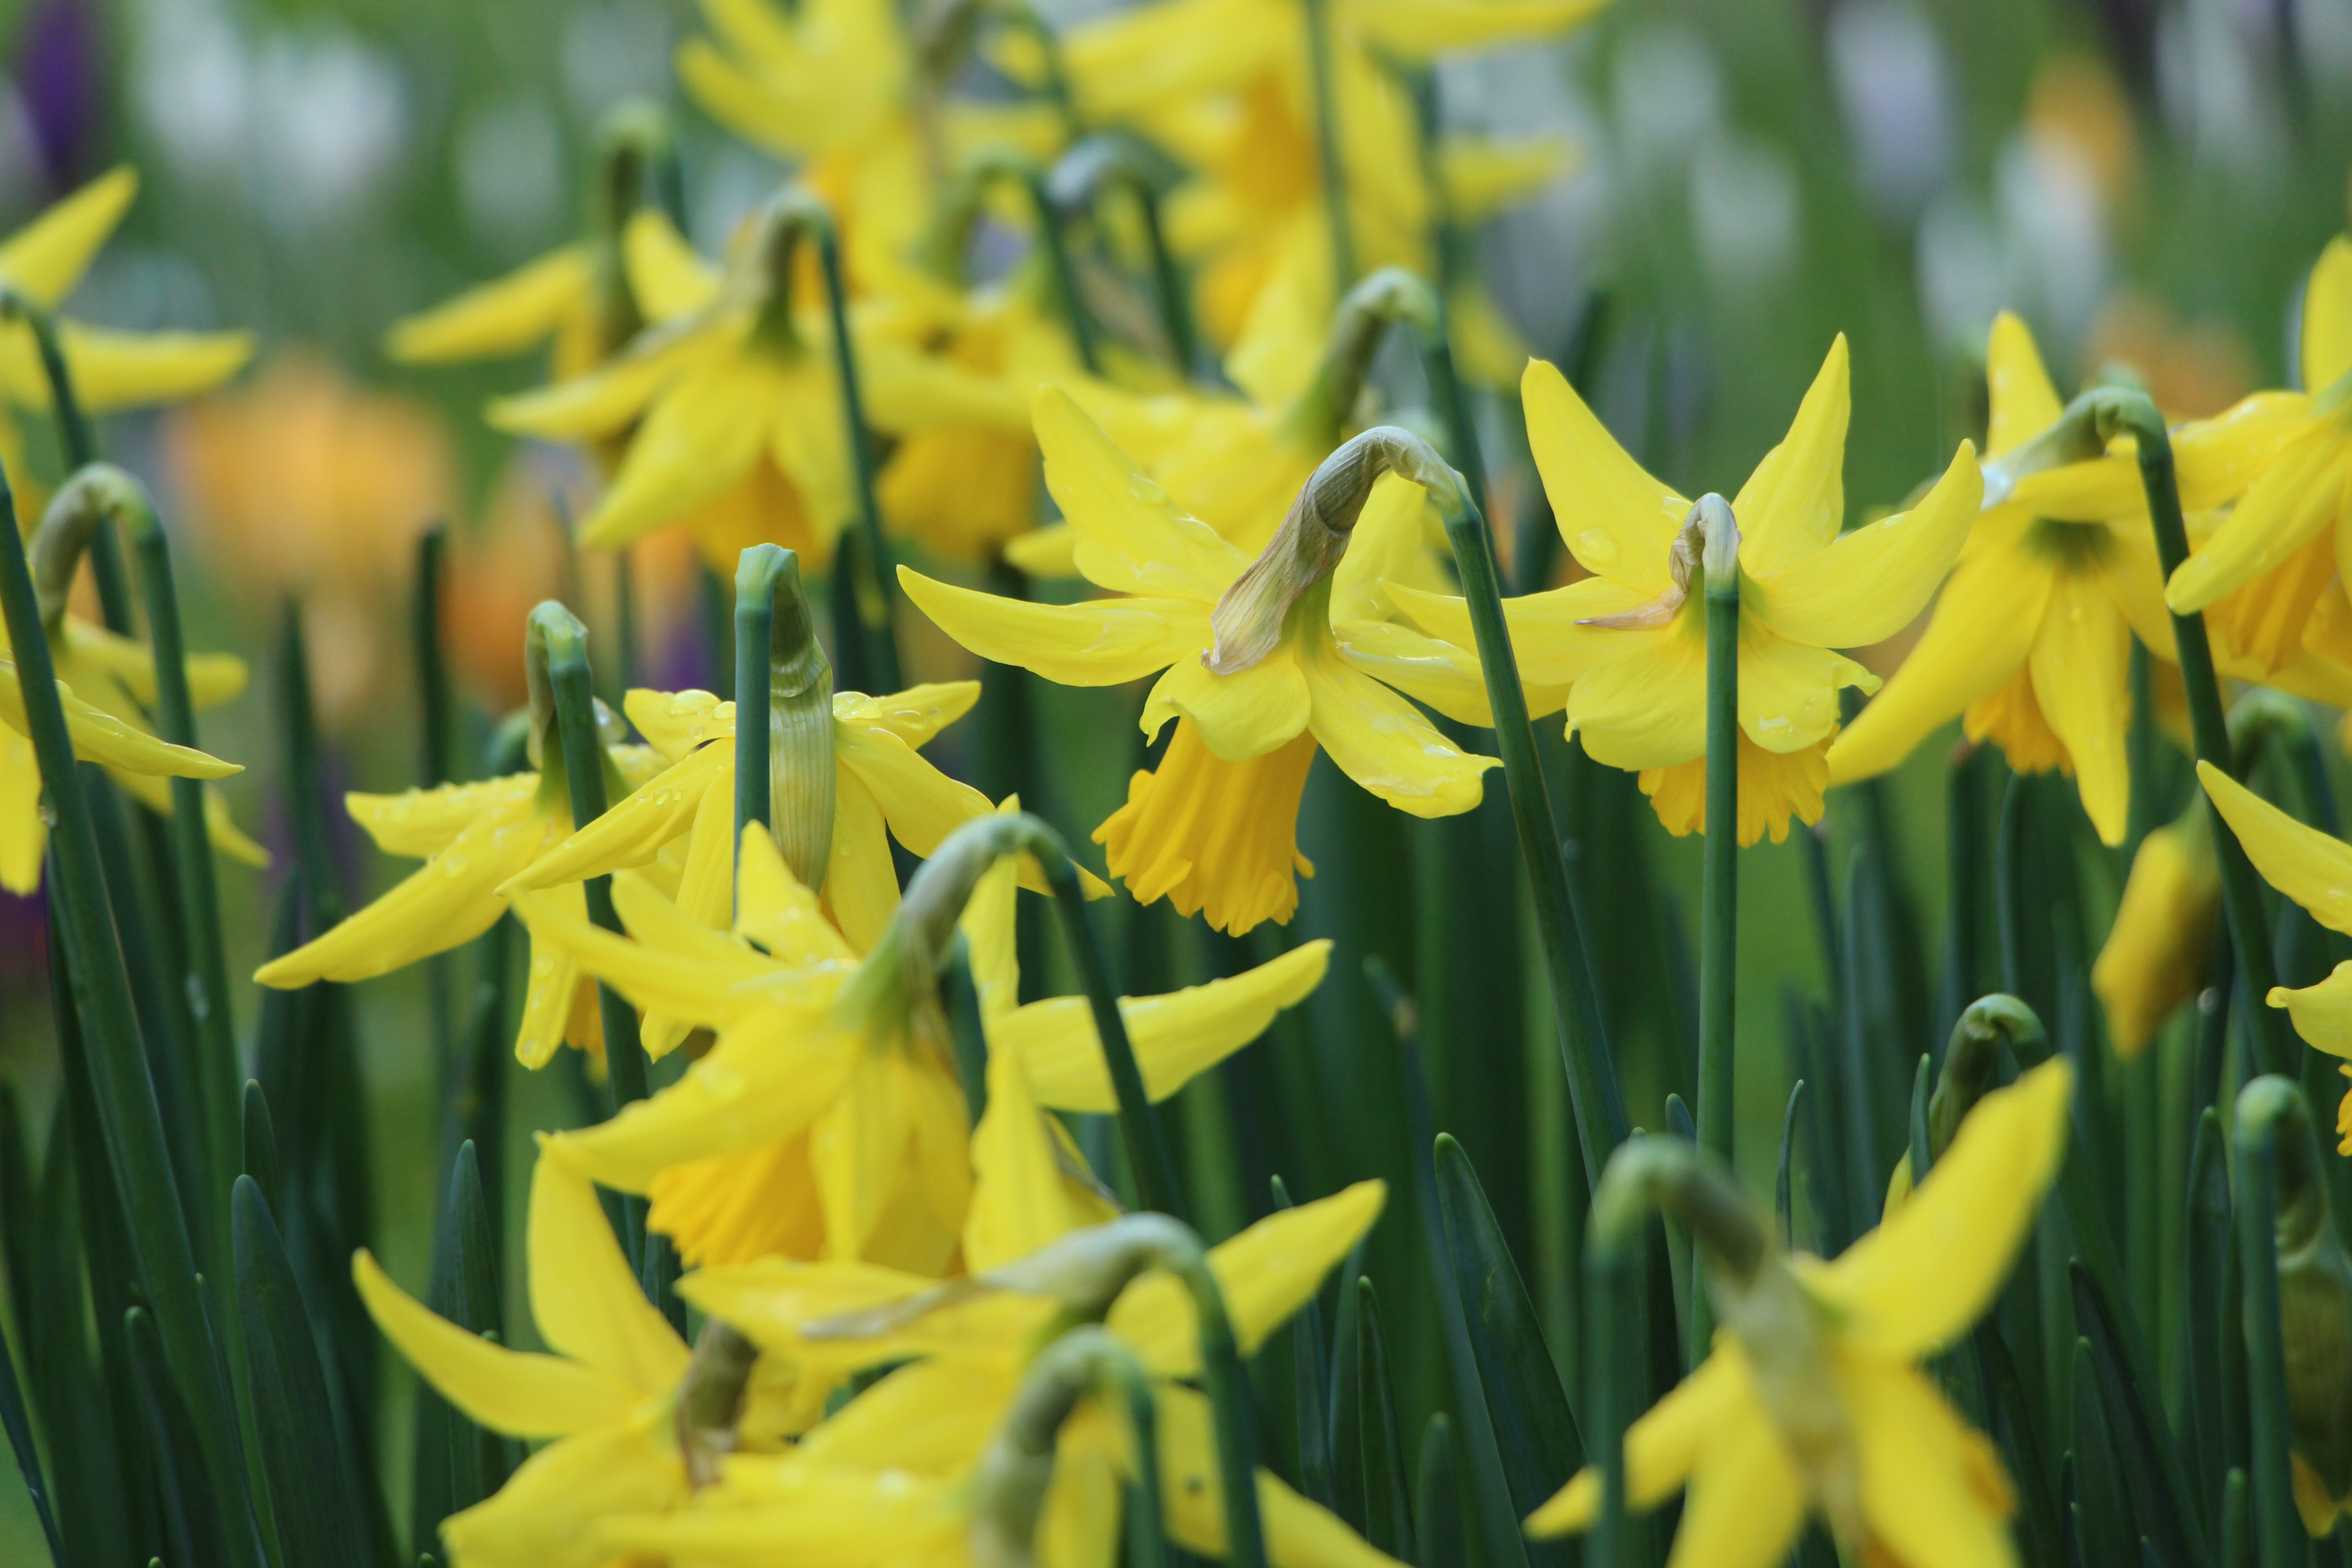 Golden daffodils herald the arrival of spring - Atco